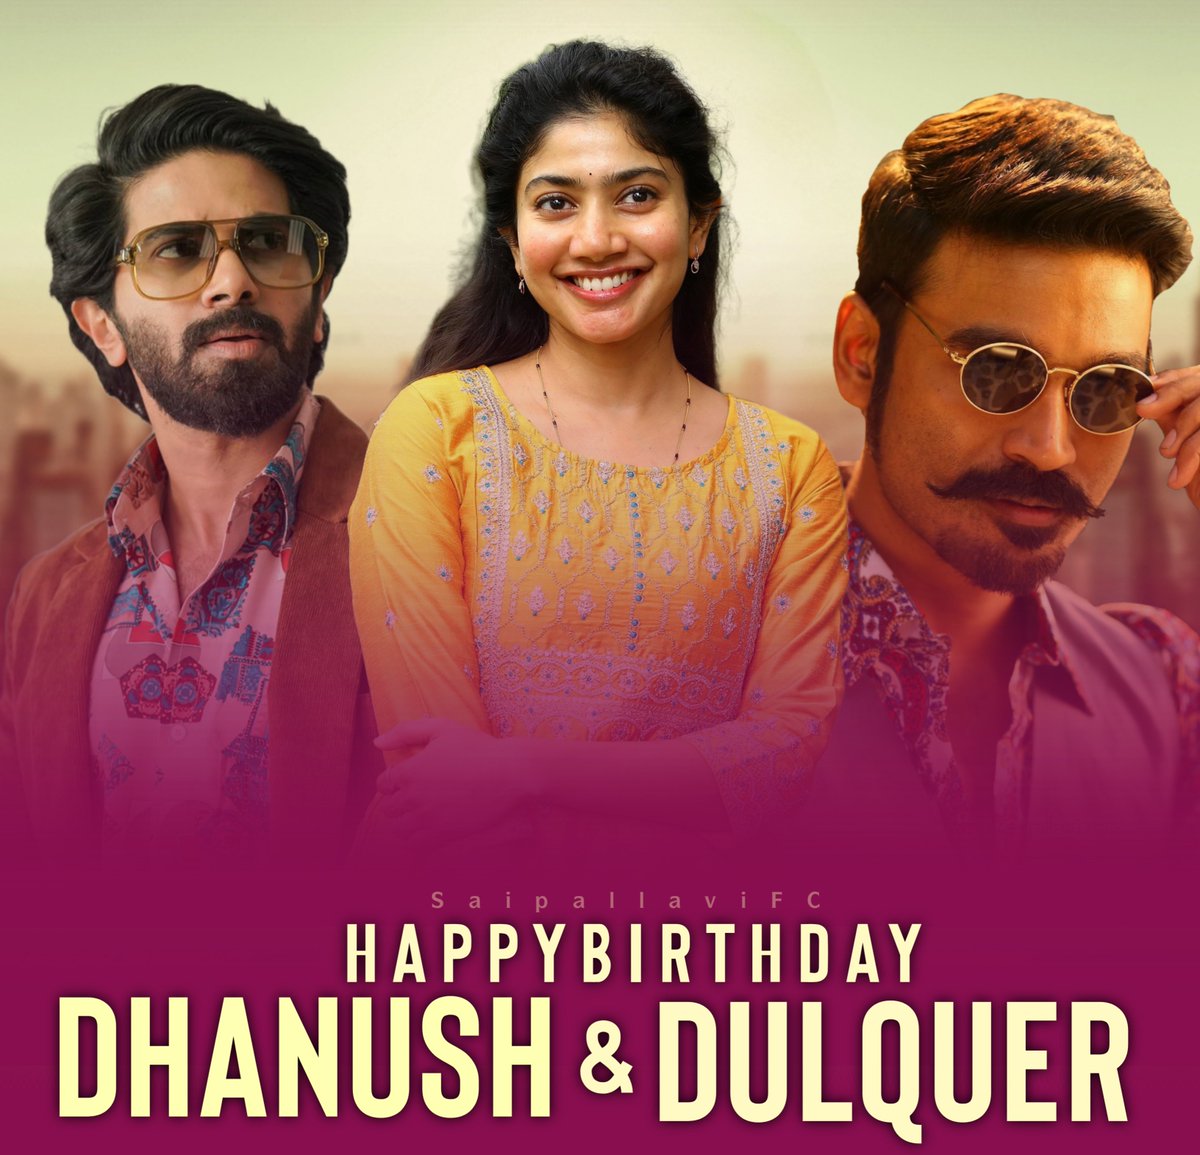 Wishing a very Happy Birthday to the Finest Actors of their Respective industries @dulQuer & @dhanushkraja gaaru from @Sai_Pallavi92 Fans ♥

Best wishes to #SitaRamam , #Vaathi/#Sir n all Upcoming projects 🤩

#HappyBirthdayDhanush
#HappyBirthdayDULQUER #SaiPallavi